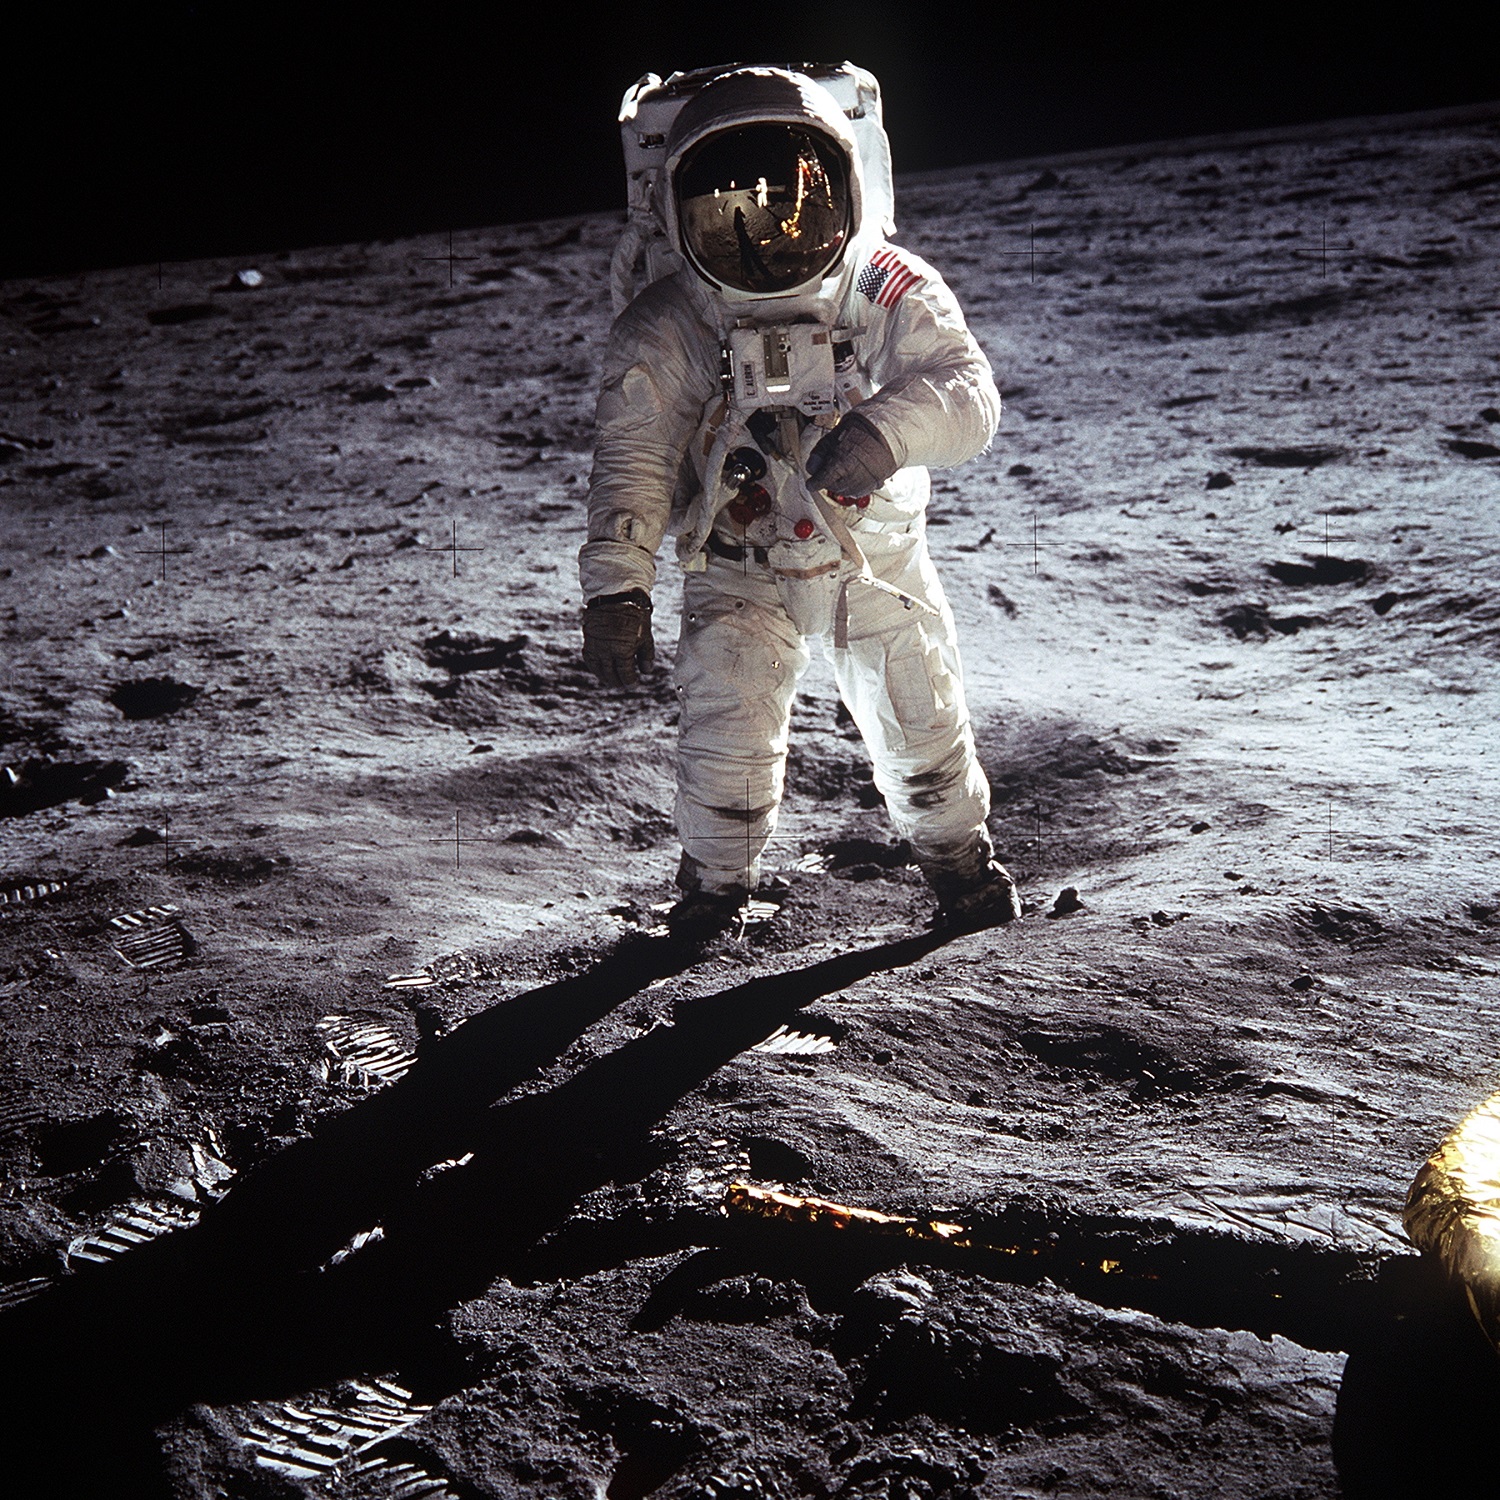 What would you pack for a trip to Moon? NASA wants to know